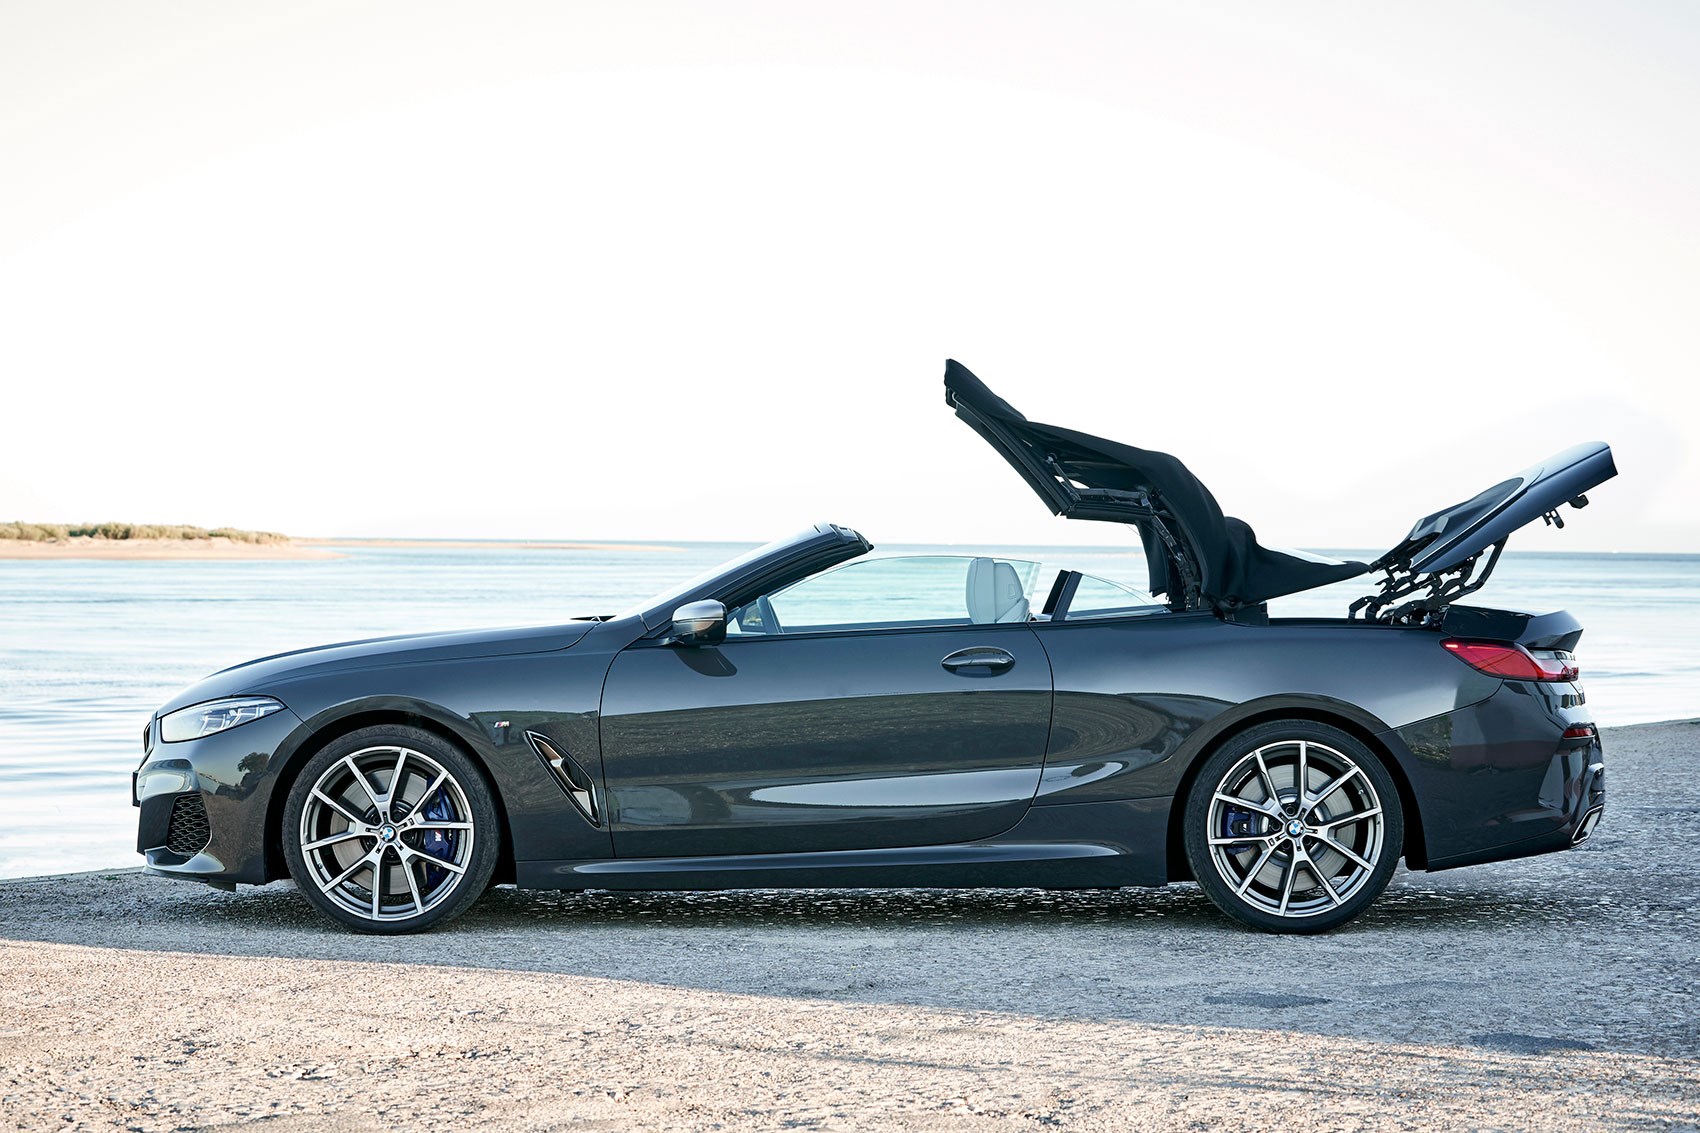 Folding soft-top cabriolet roof on the new 2019 BMW 8-series Convertible